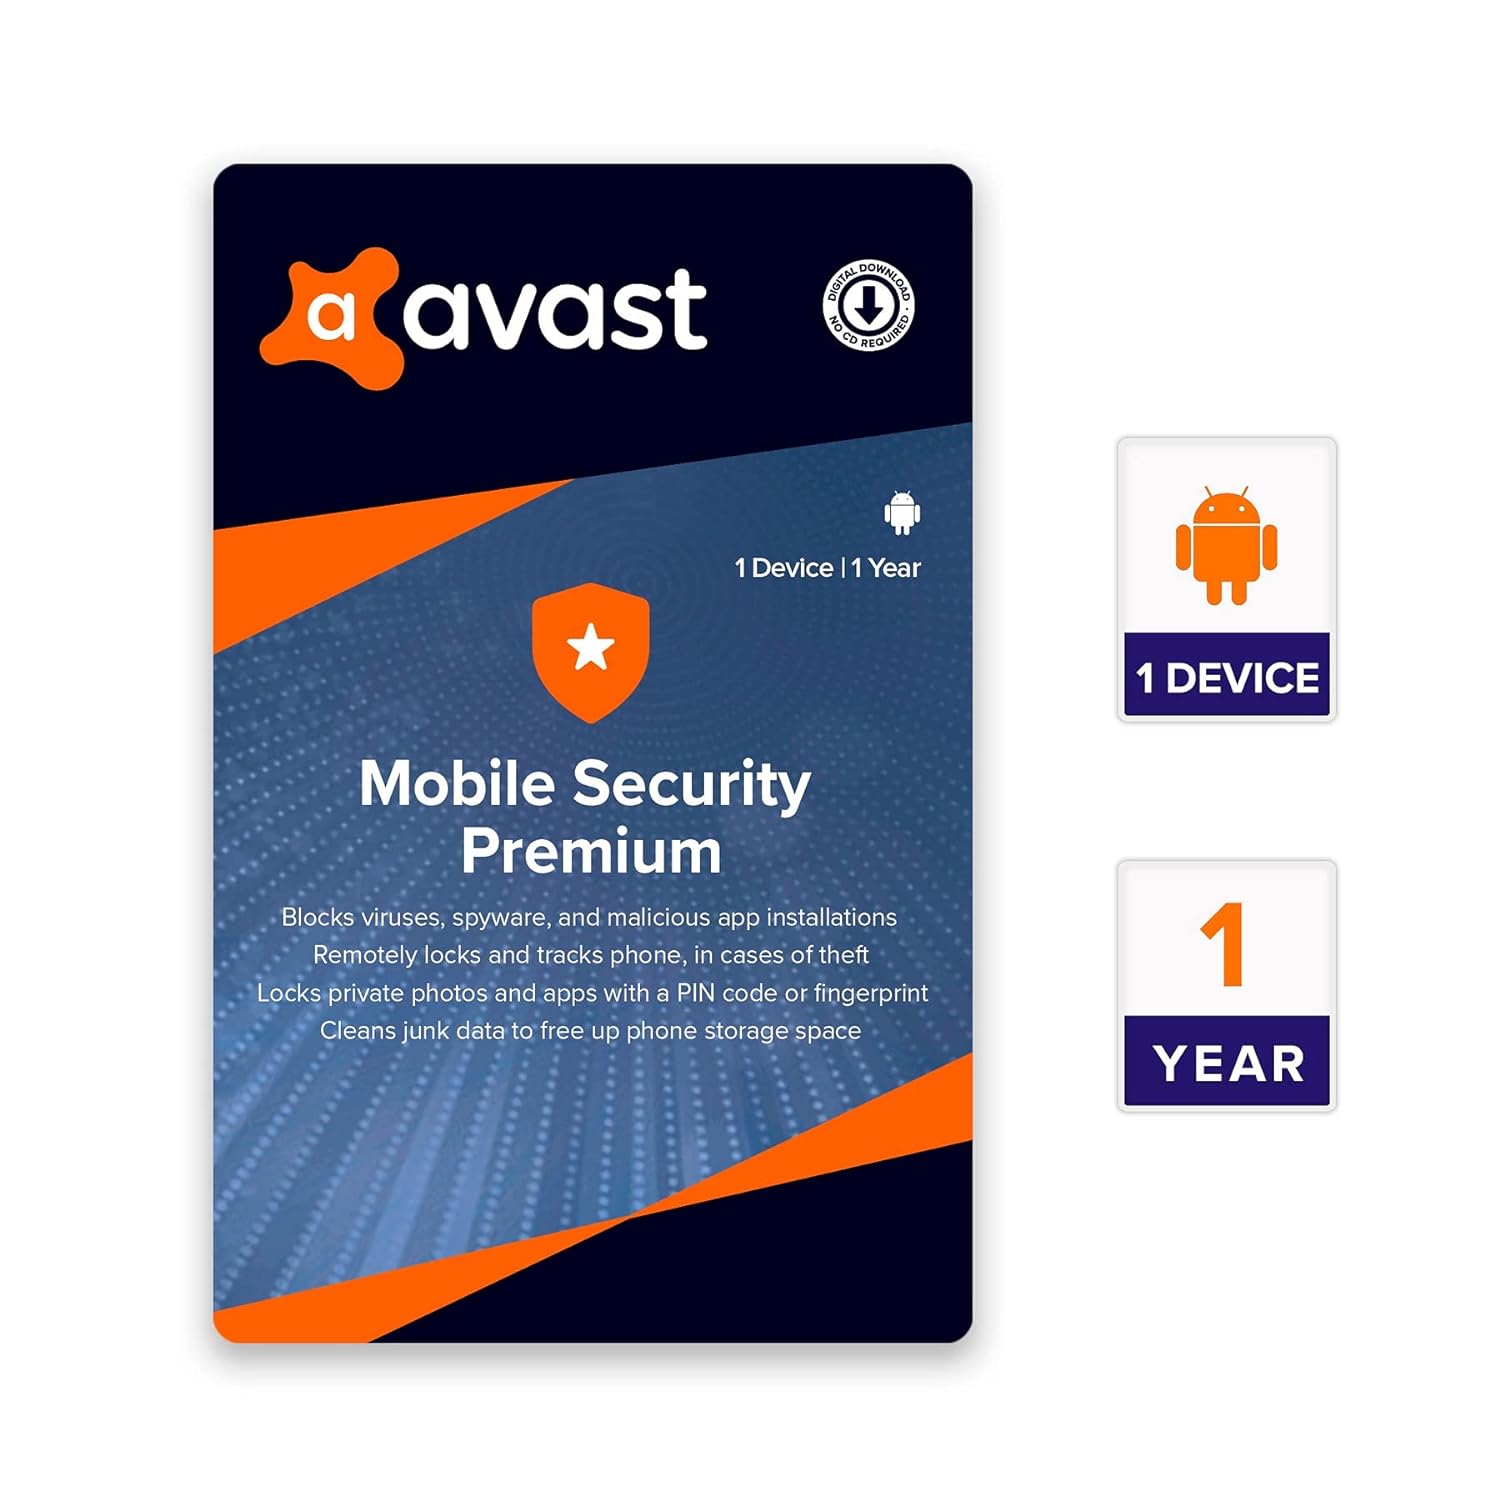 Avast Ultimate Mobile Security Premium for Android 2023 Key (1 Year / 1 Device), 7.41$